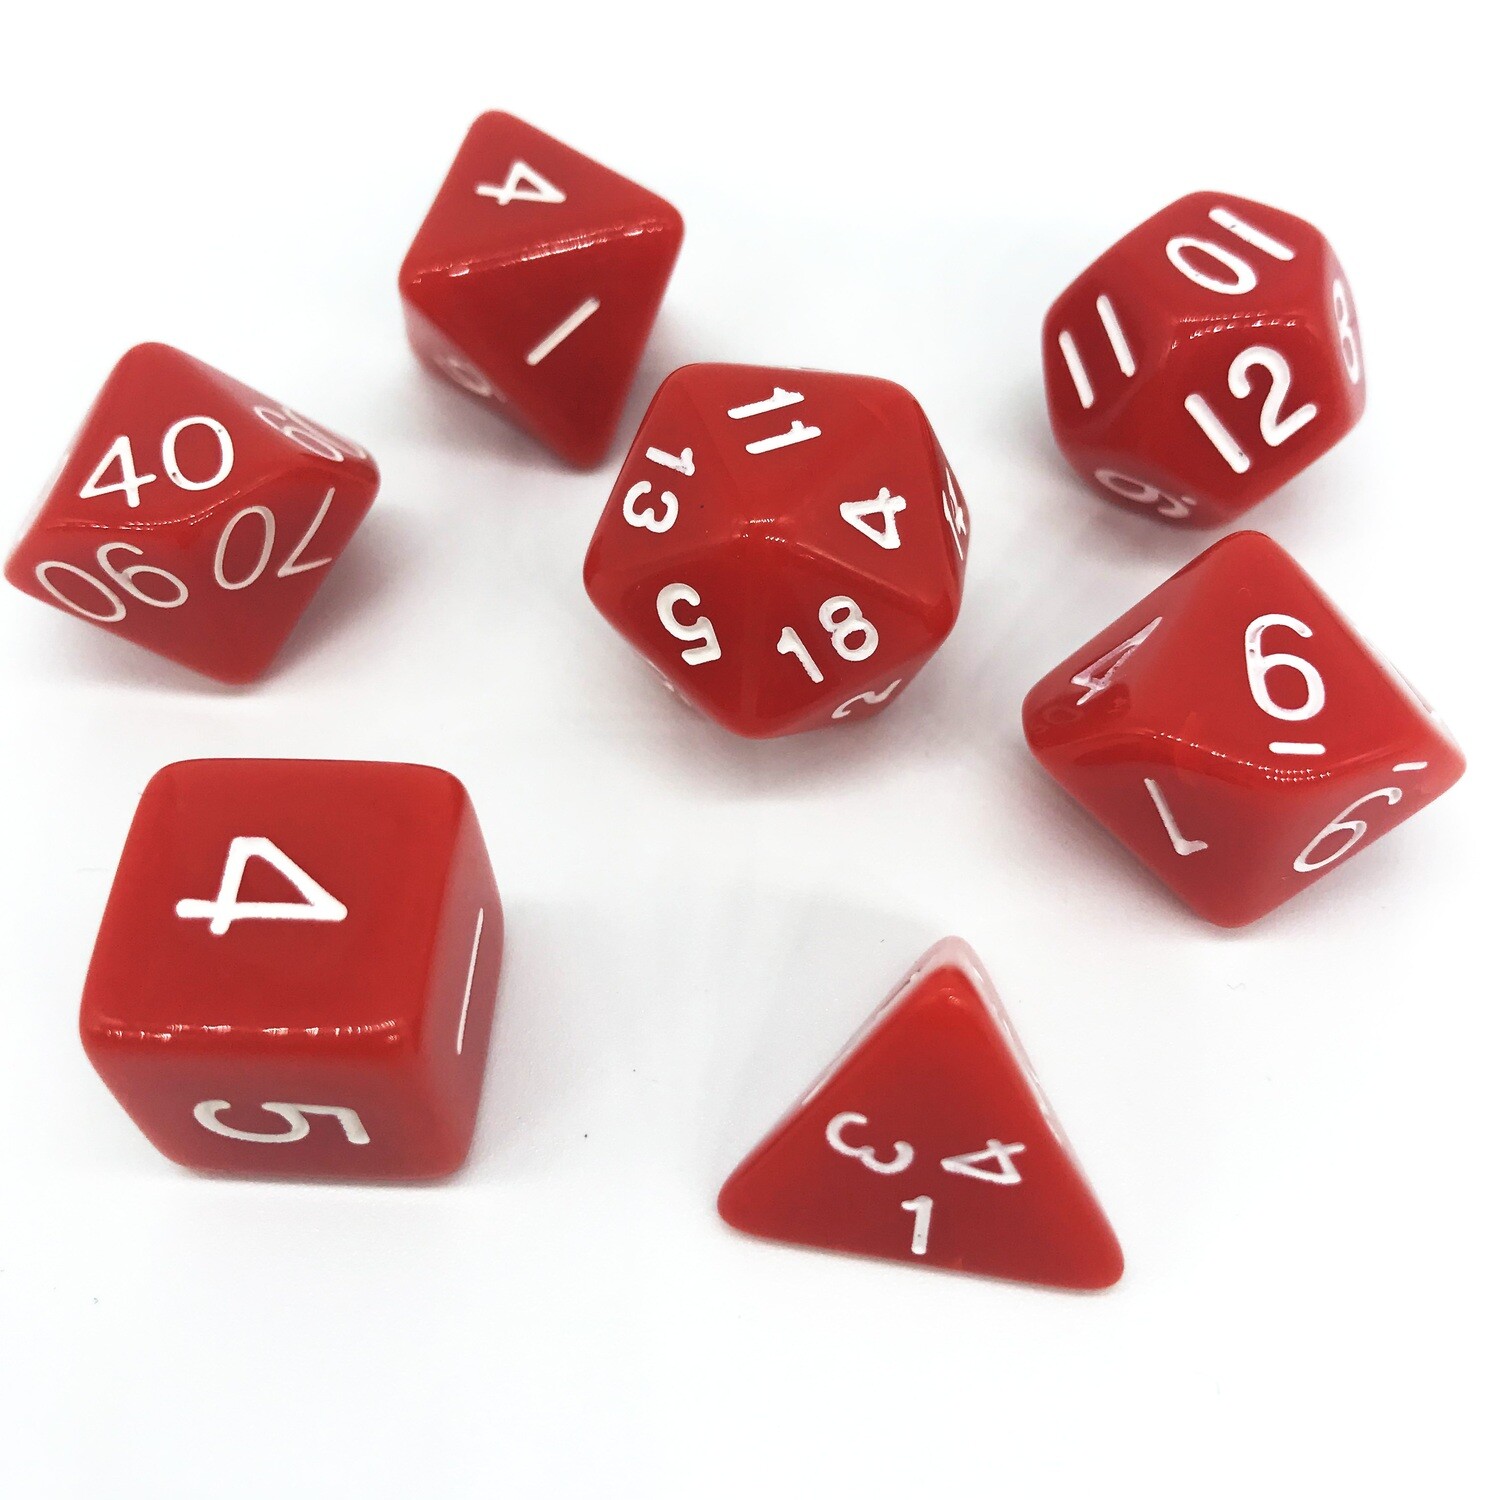 Dice Set - Red solid with white numbers